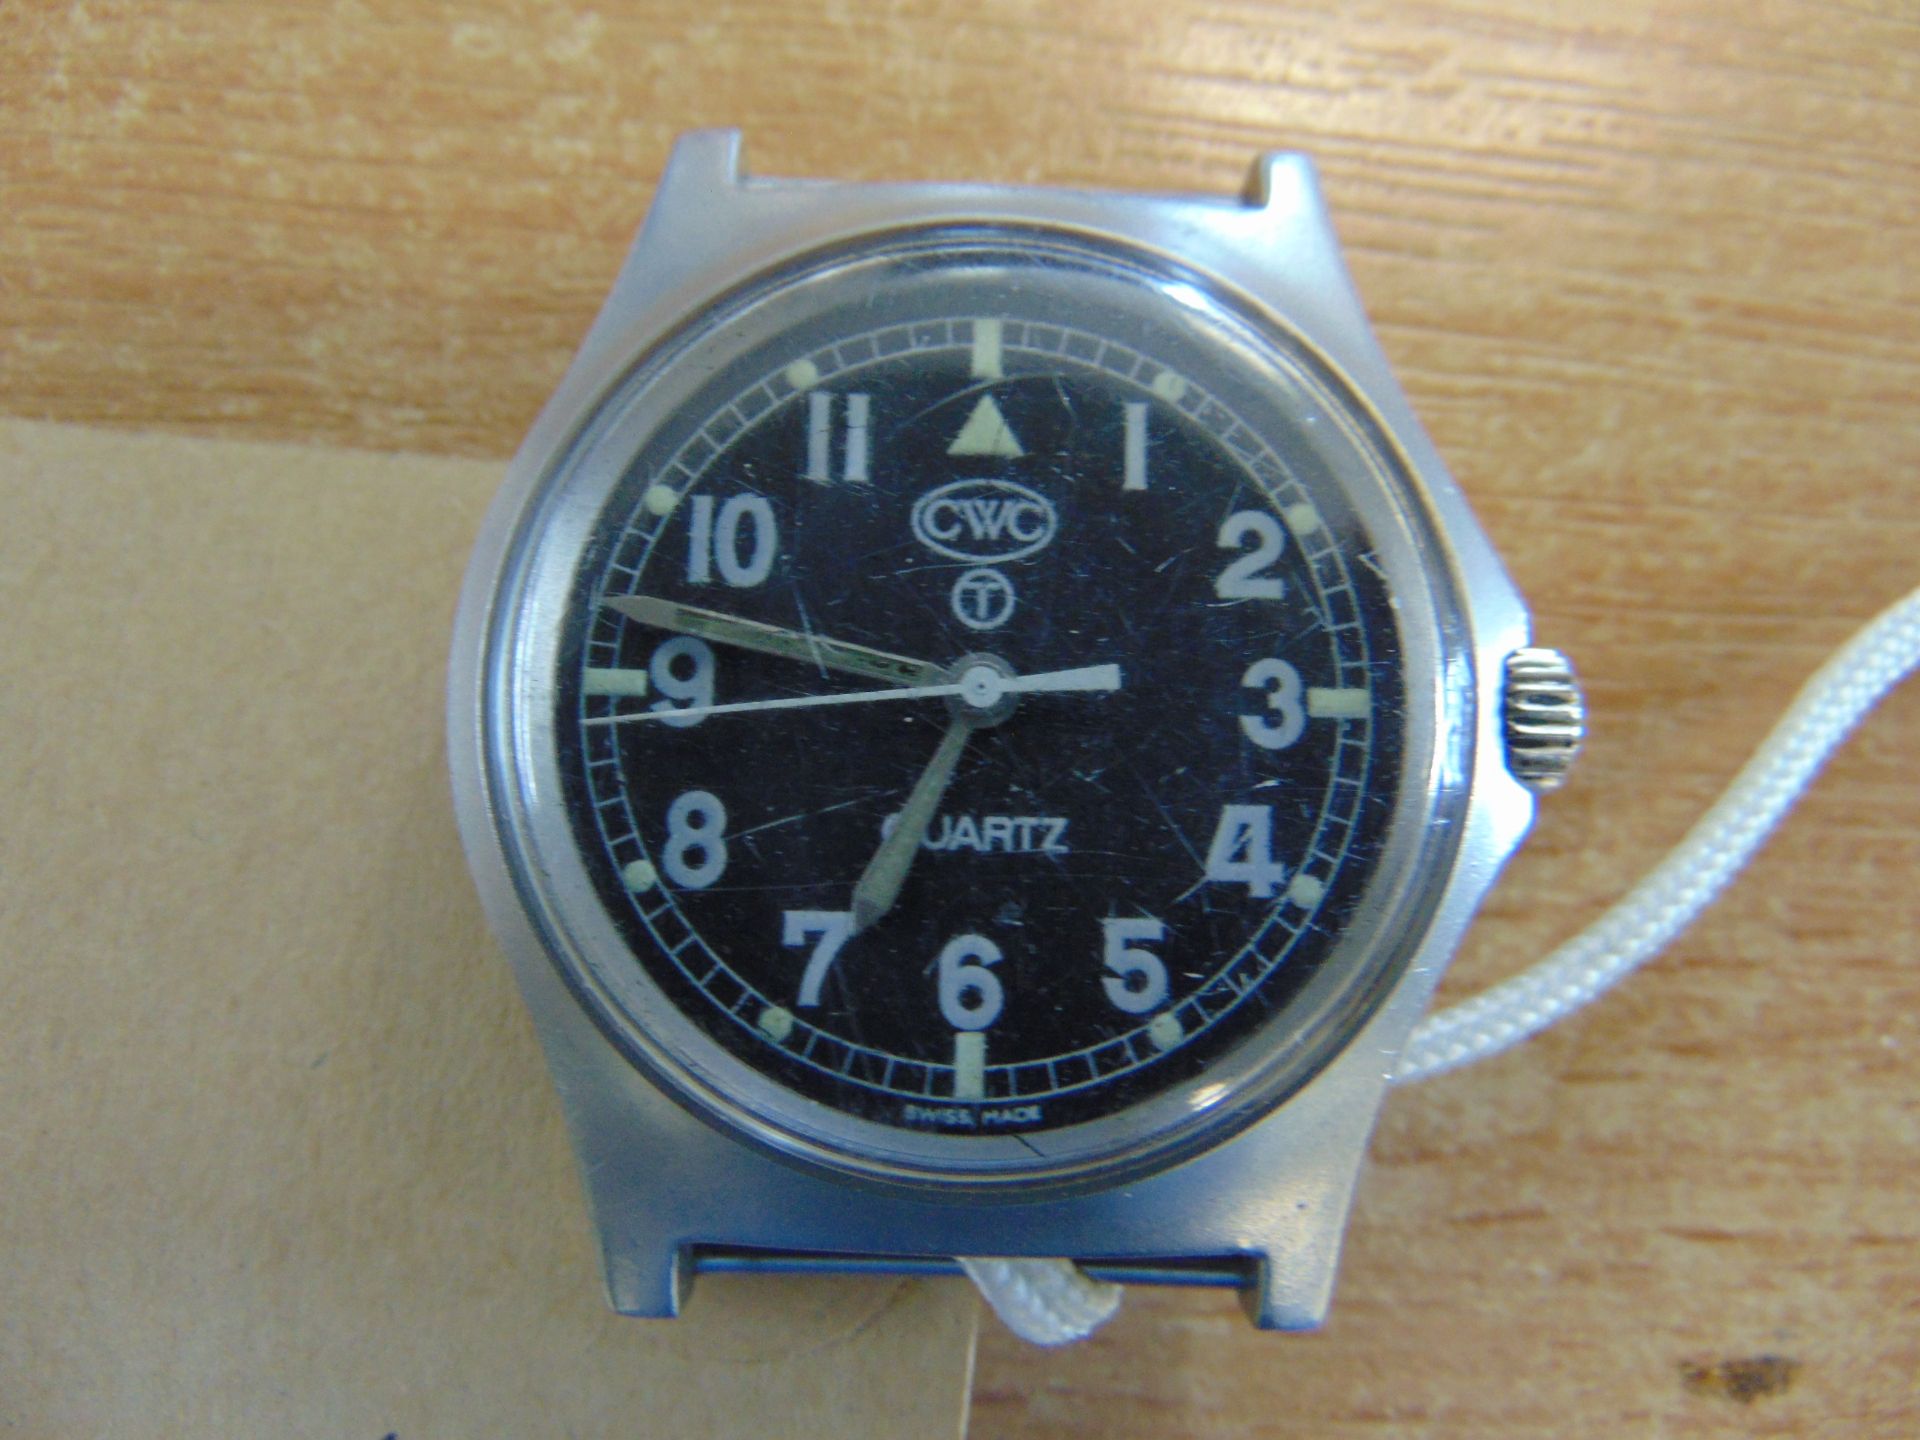 Rare CWC 0552 Royal Marines Issue Service Watch Nato Markings, Date 1989 - Image 2 of 3